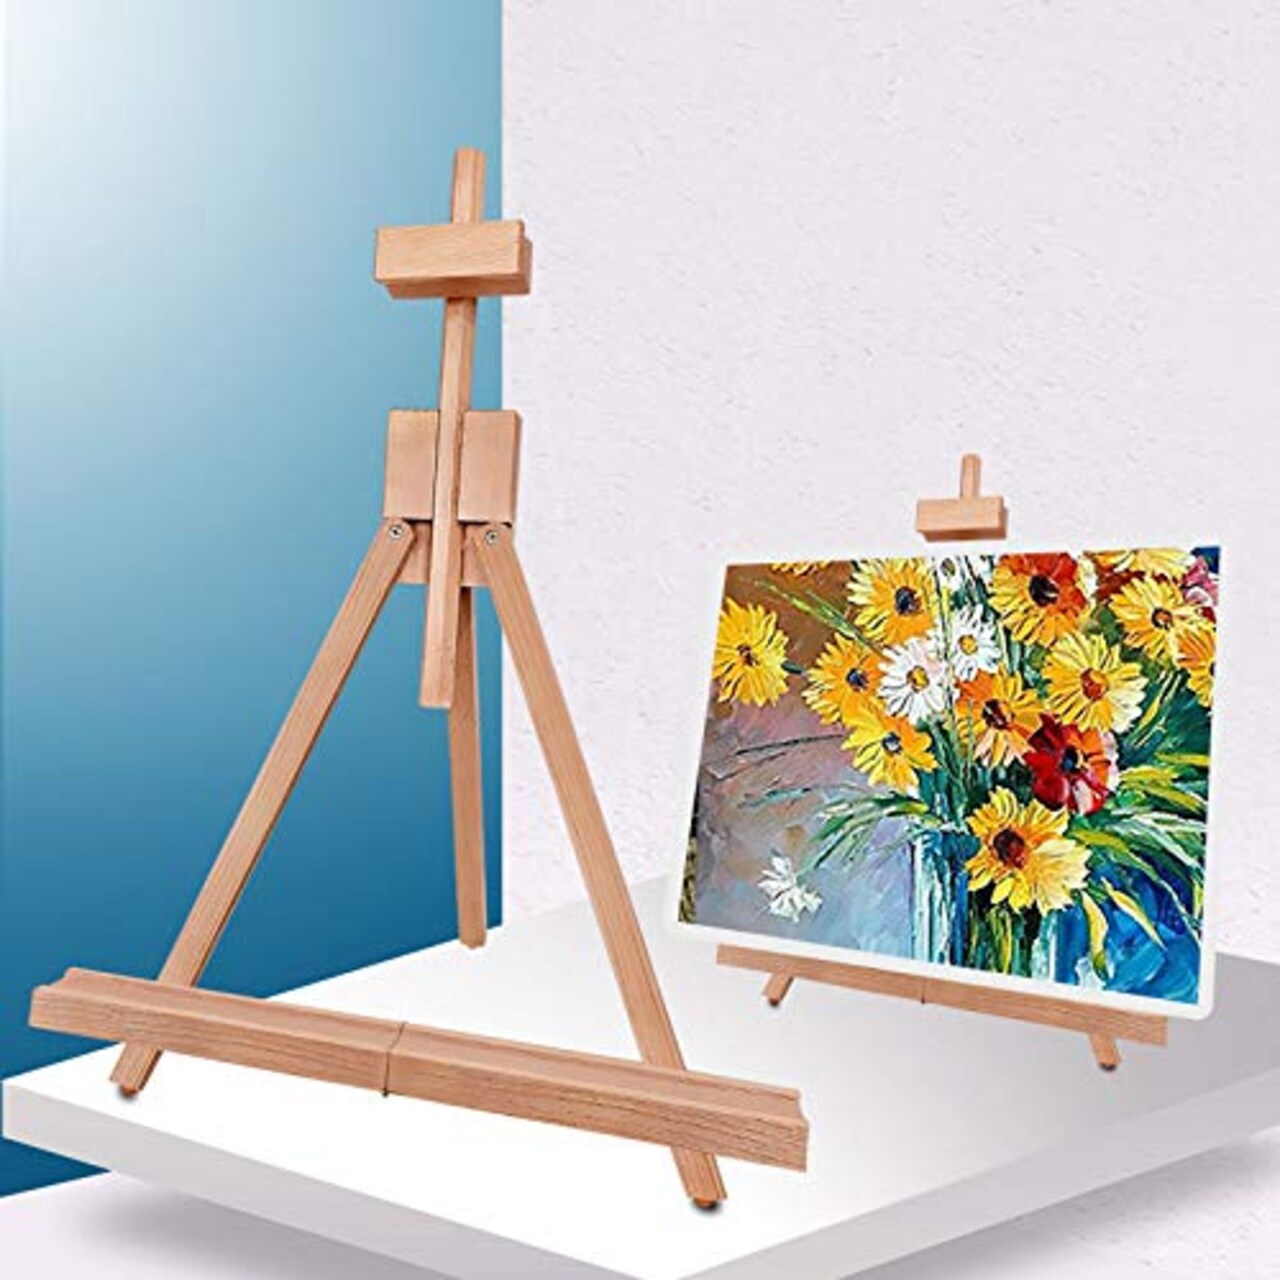 Miratuso Painting Easel, Folding Wooden Tabletop Easel Stand Holds Highest  to 21 Canvas, Portable Desktop Easel Suitable for Artists, Beginners,  Students